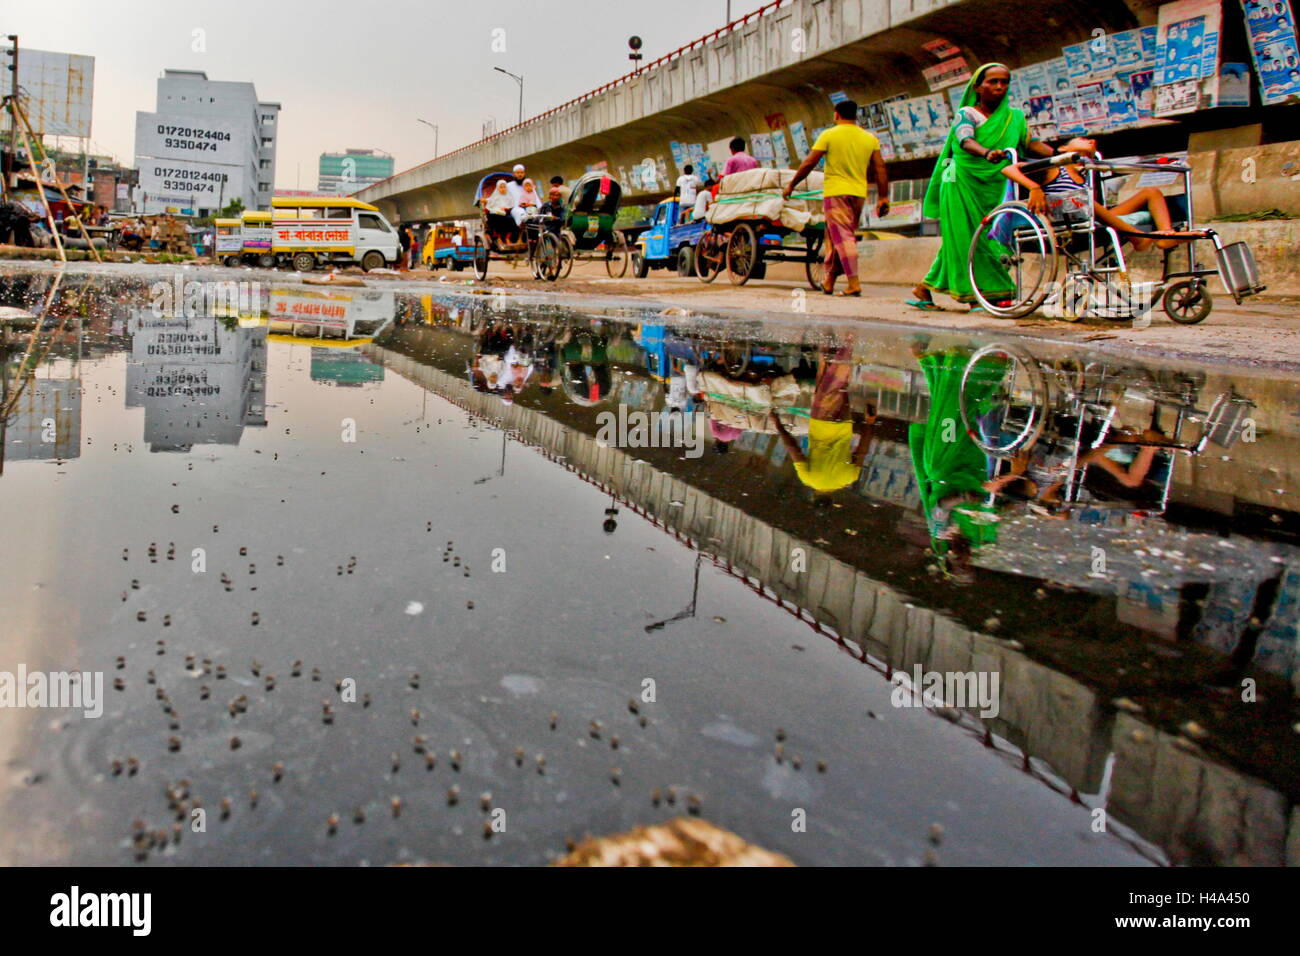 Dhaka, Bangladesh. 13th Oct, 2016. Without decent sewerage system. Dhaka is a metropolitan city without decent sewerage system, sewerage system is so poor that it always over flows and flooded the streets. This filthy water is safe house for mosquitoes and debases. © AR Sumon/ZUMA Wire/ZUMAPRESS.com/Alamy Live News Stock Photo